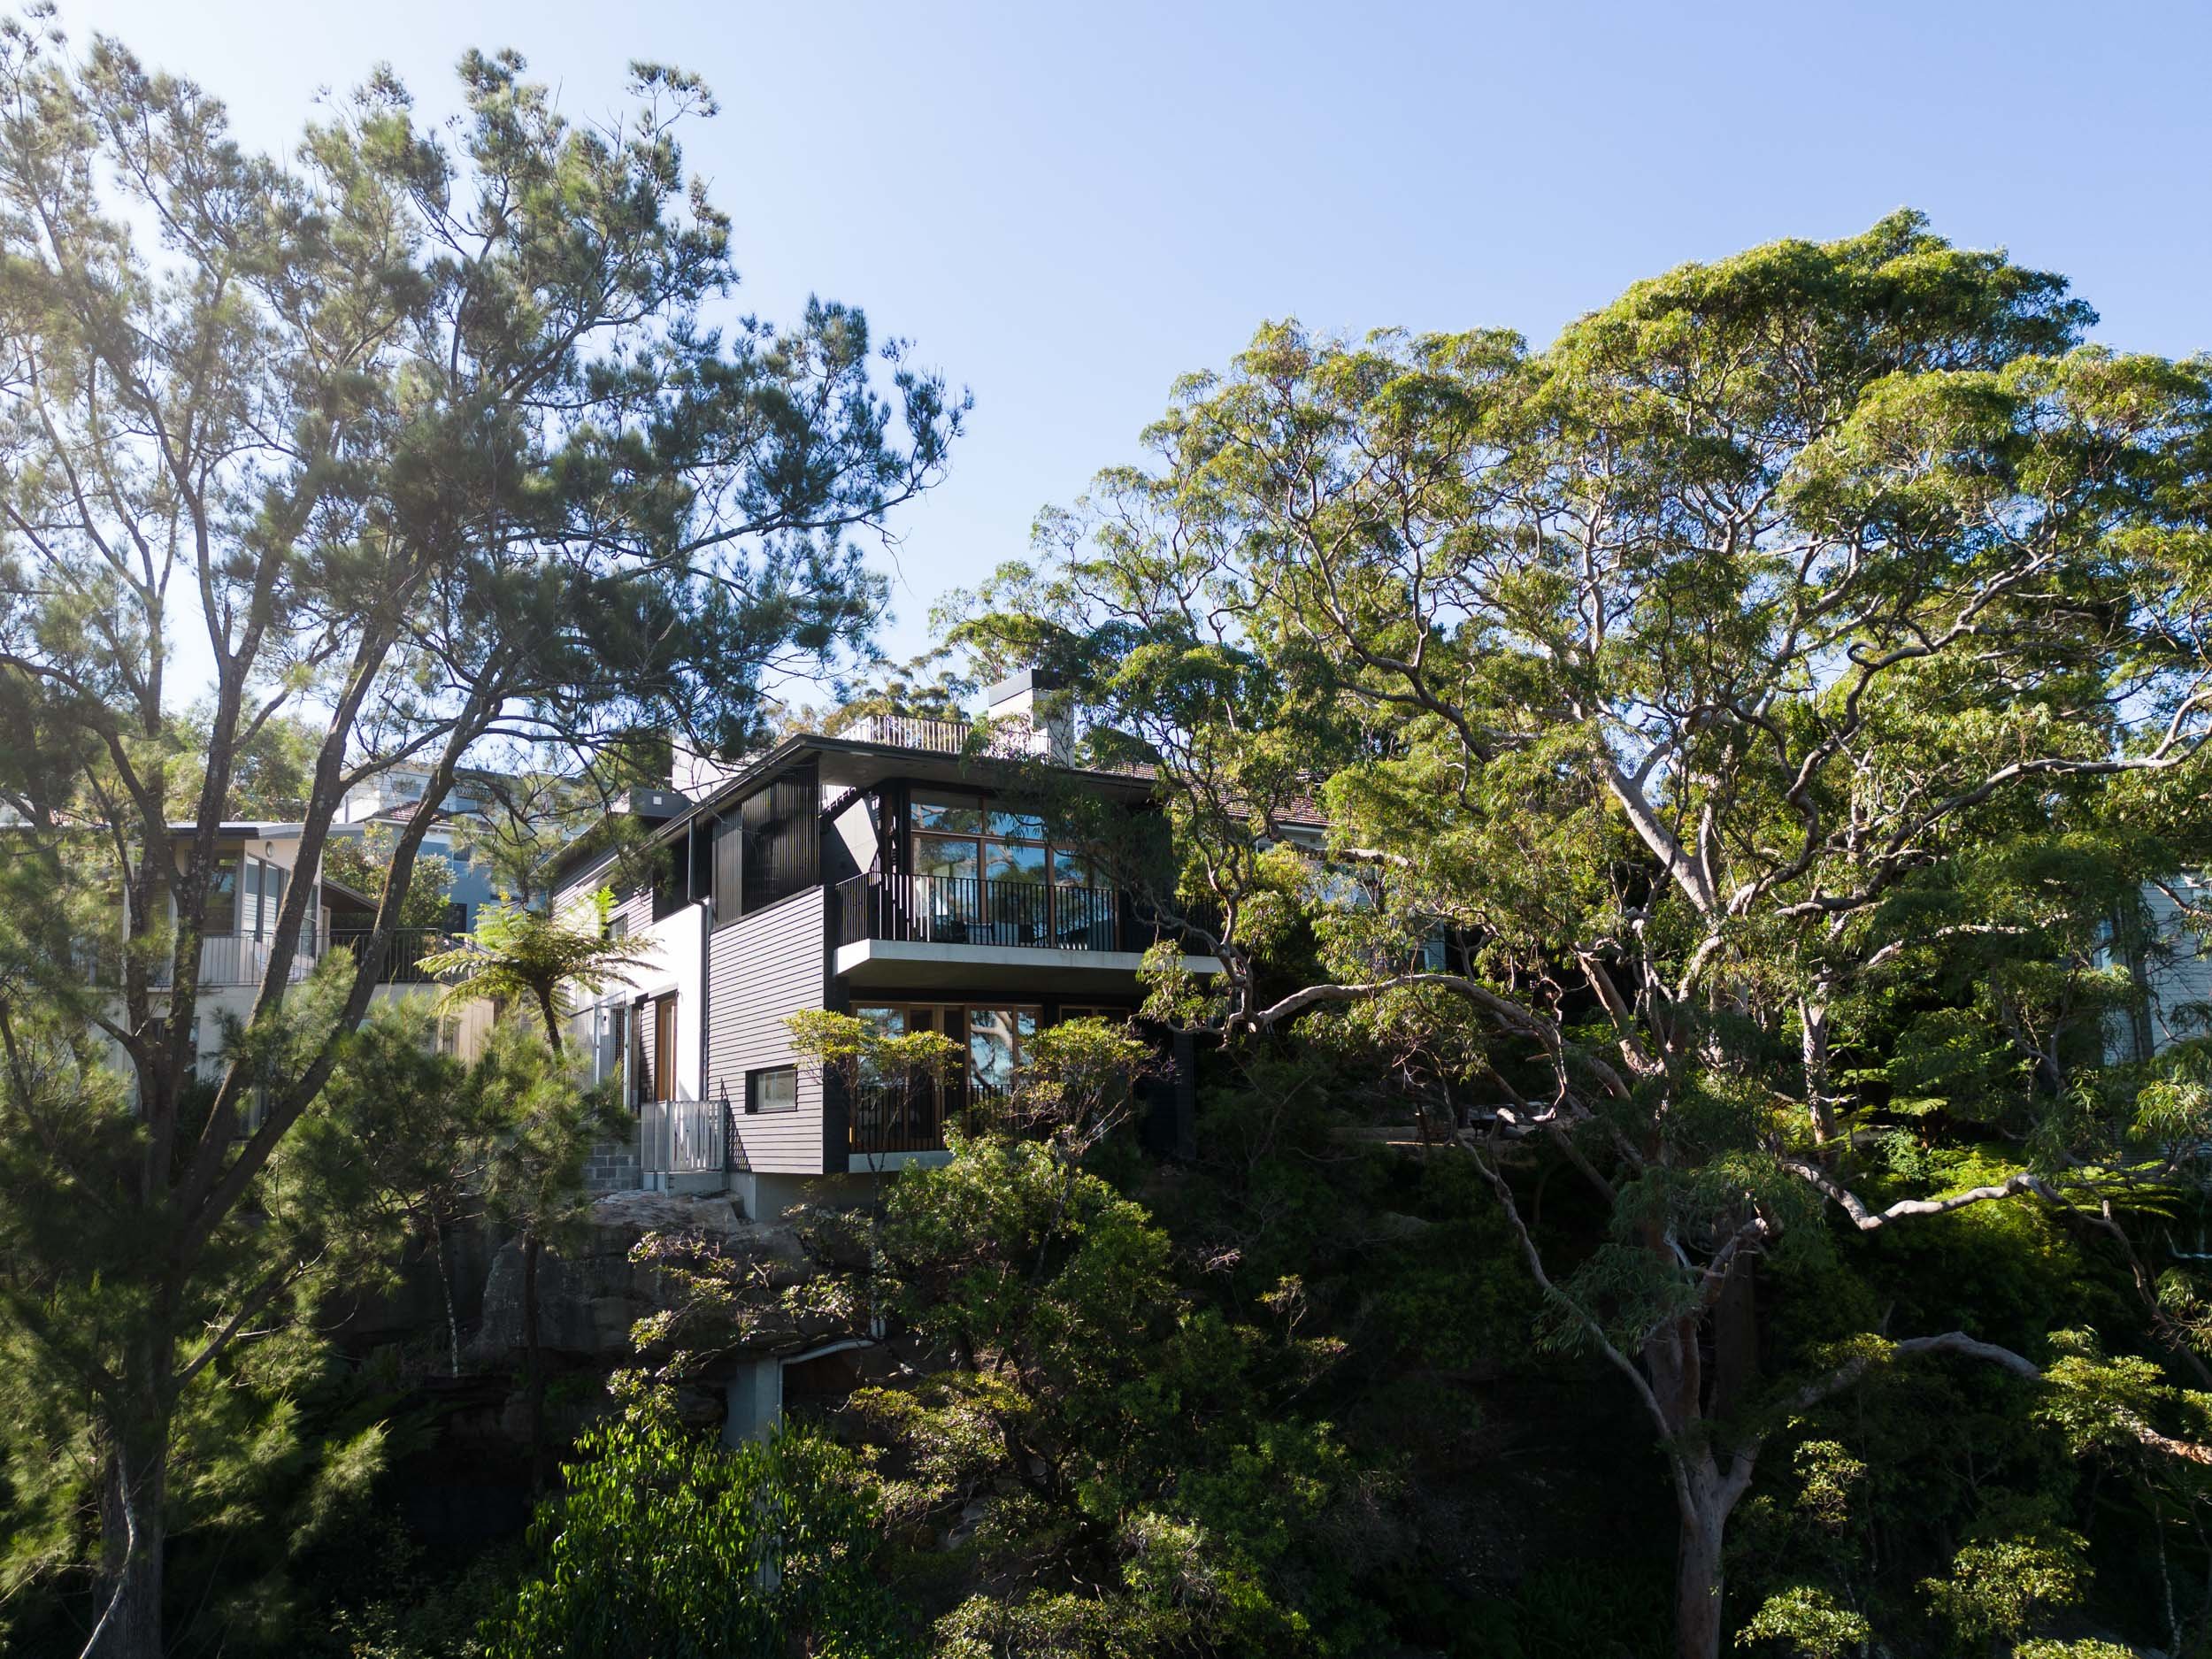  House perched among dense trees, featuring large windows and a balcony. 